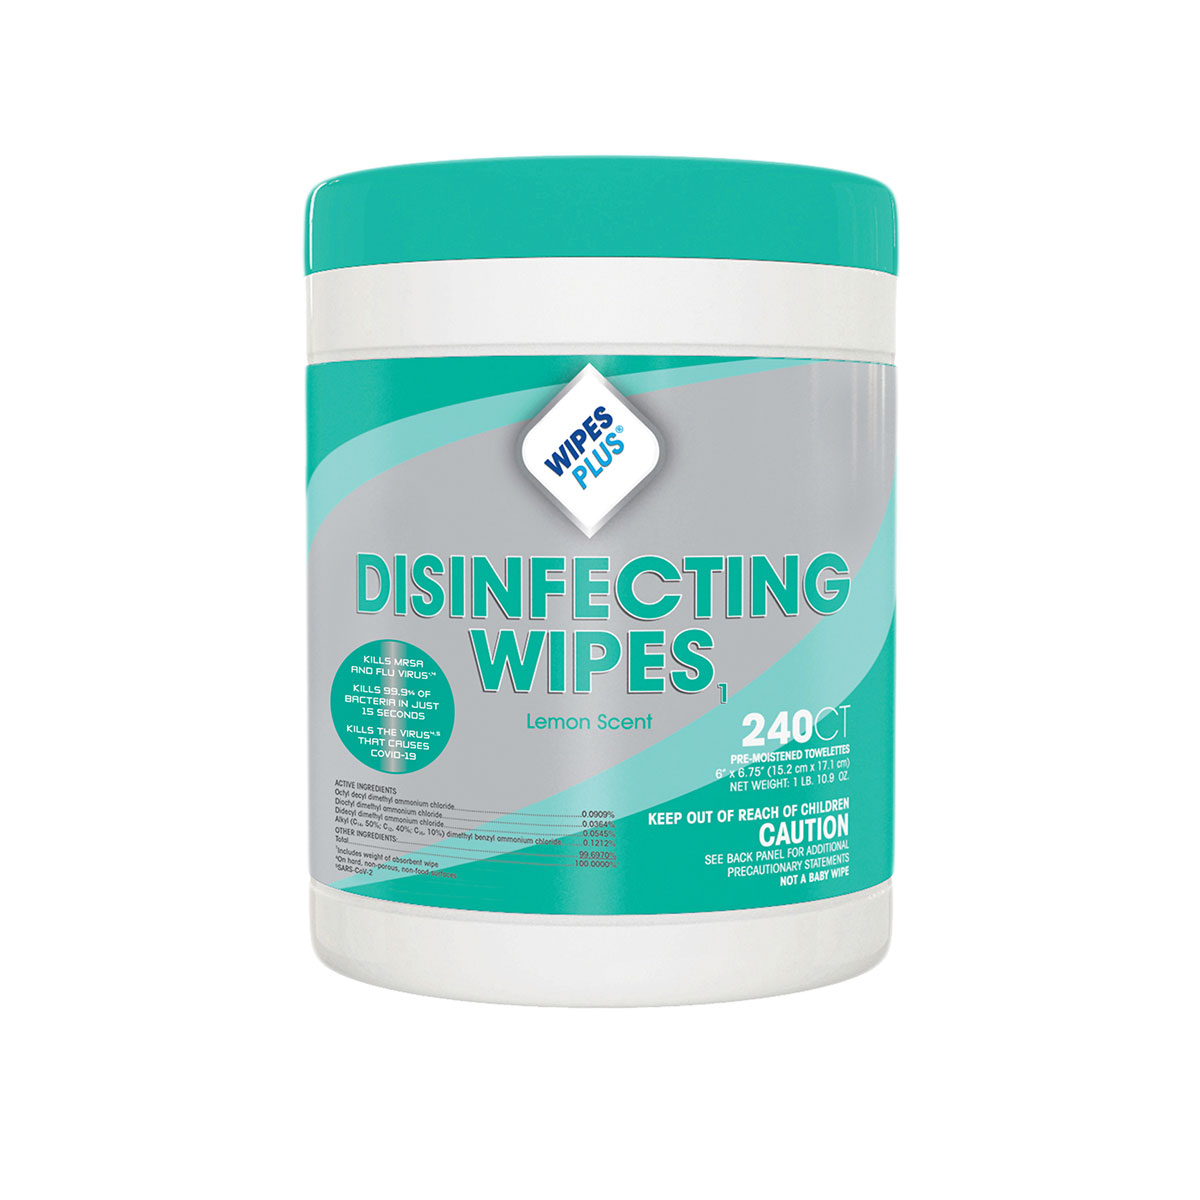 12/240 WipesPlus Surface Disinfecting Wipes 6.x6.75